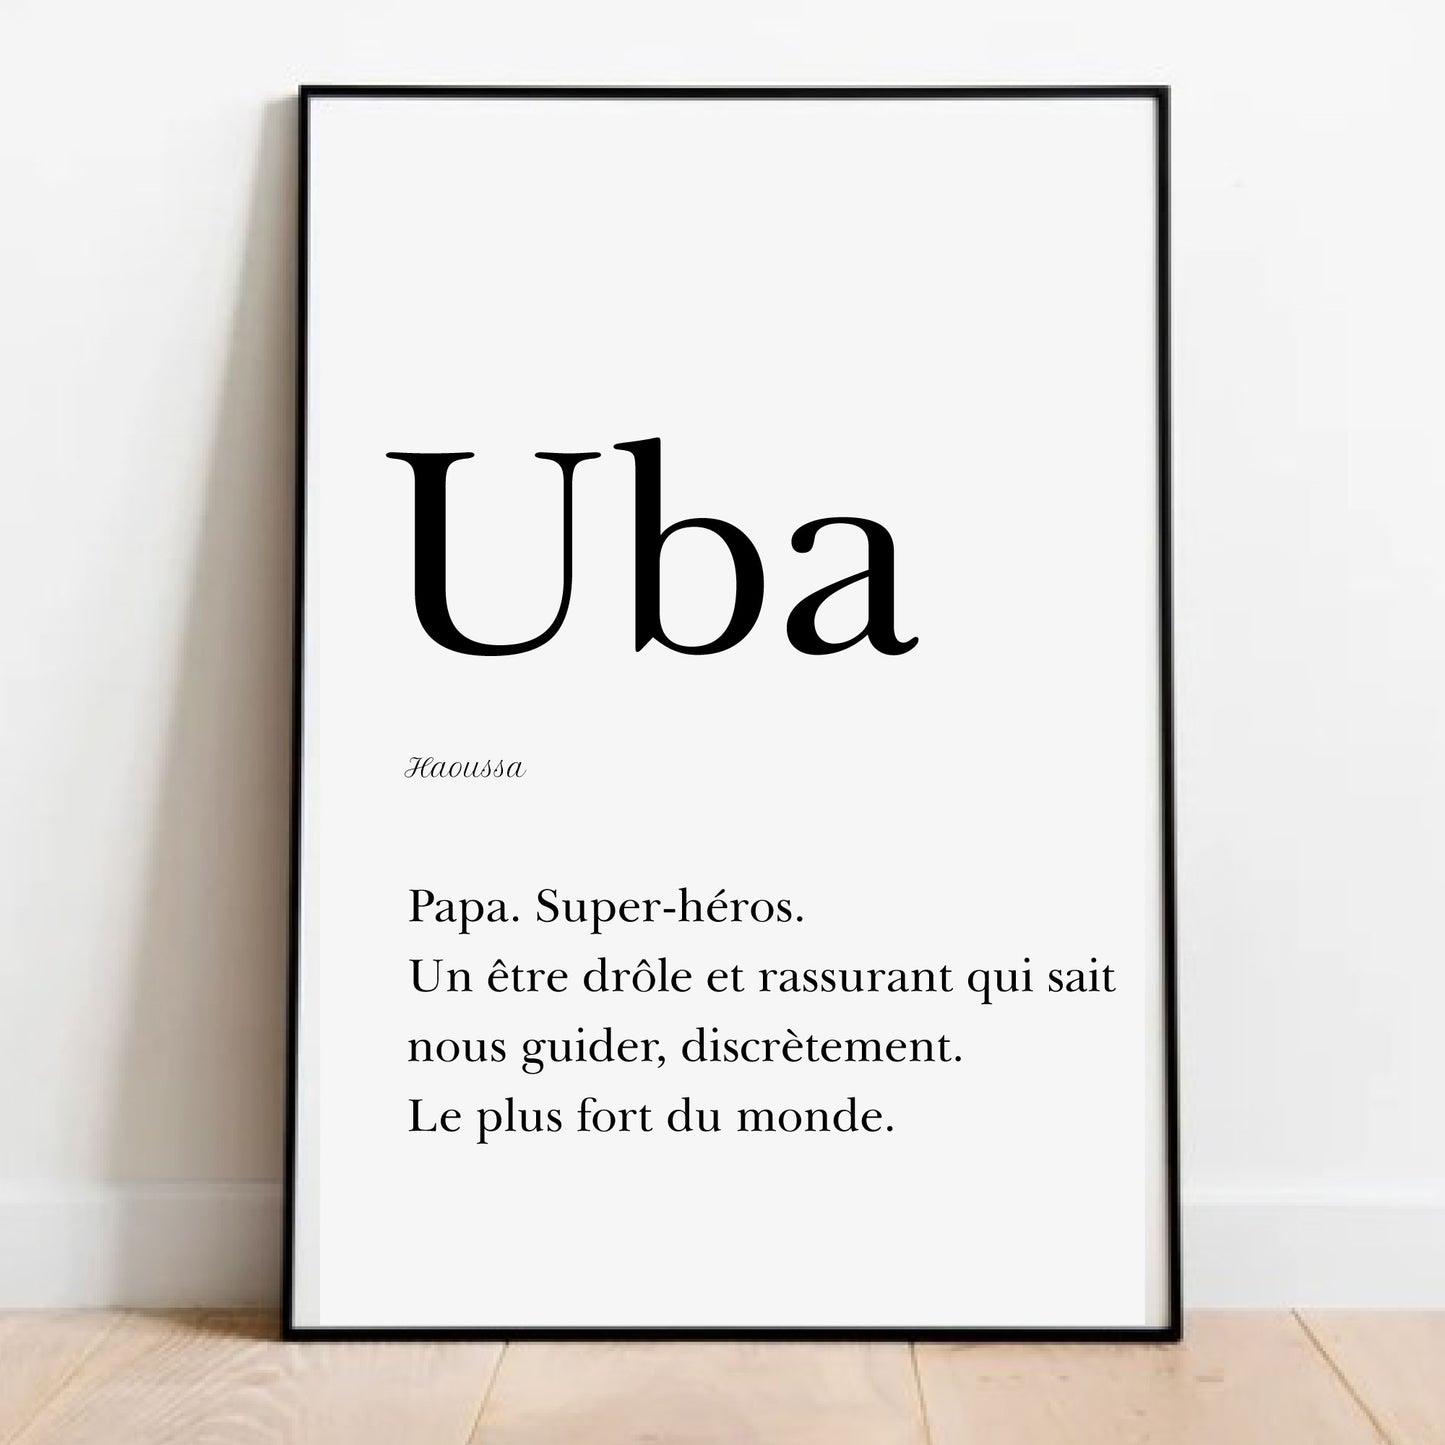 "Dad" in Hausa -  "Uba" poster